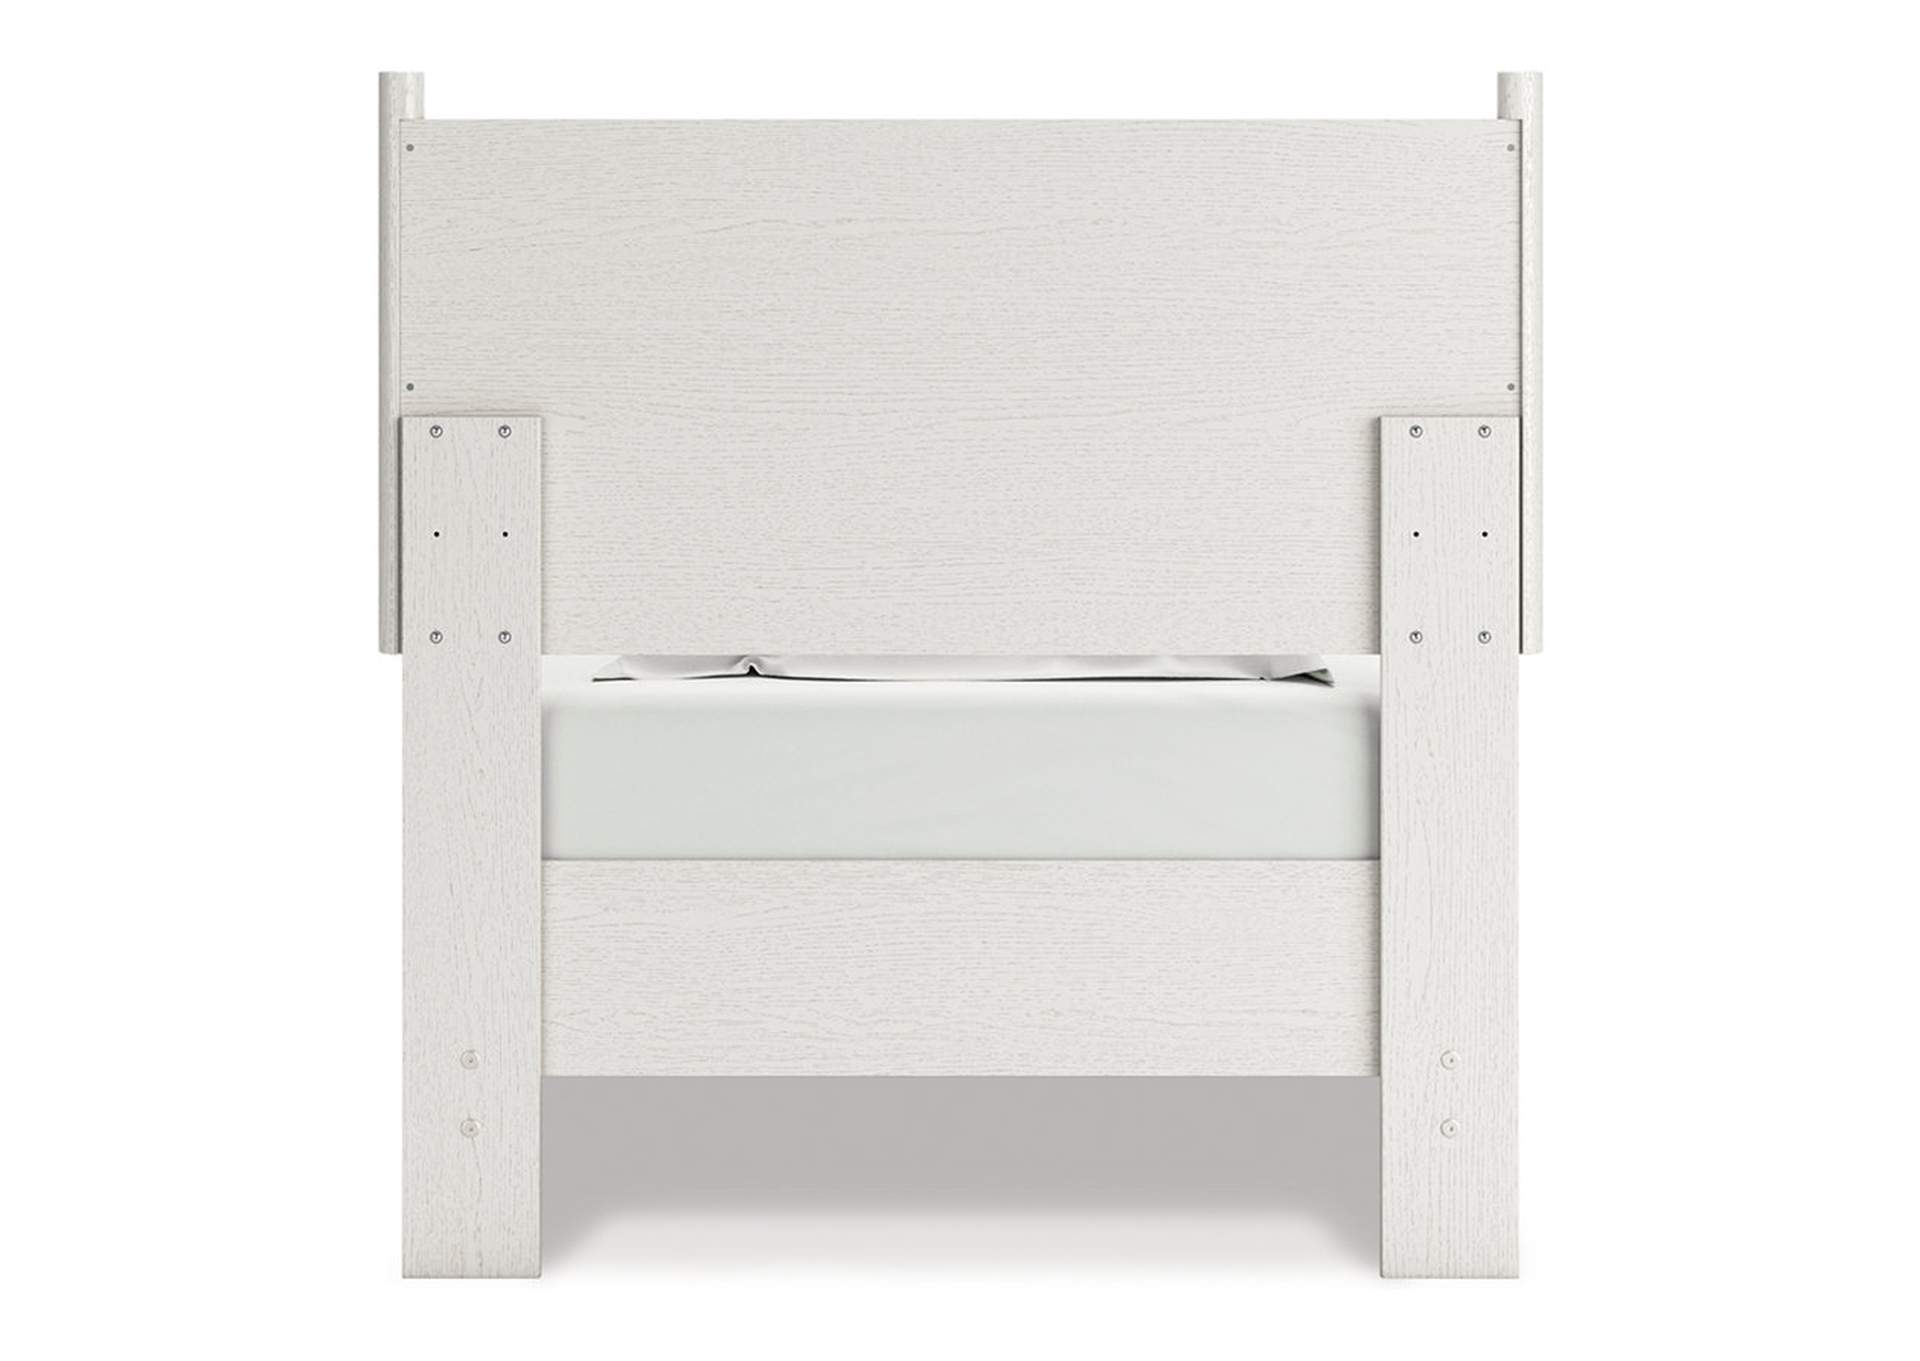 Aprilyn Twin Panel Bed,Signature Design By Ashley